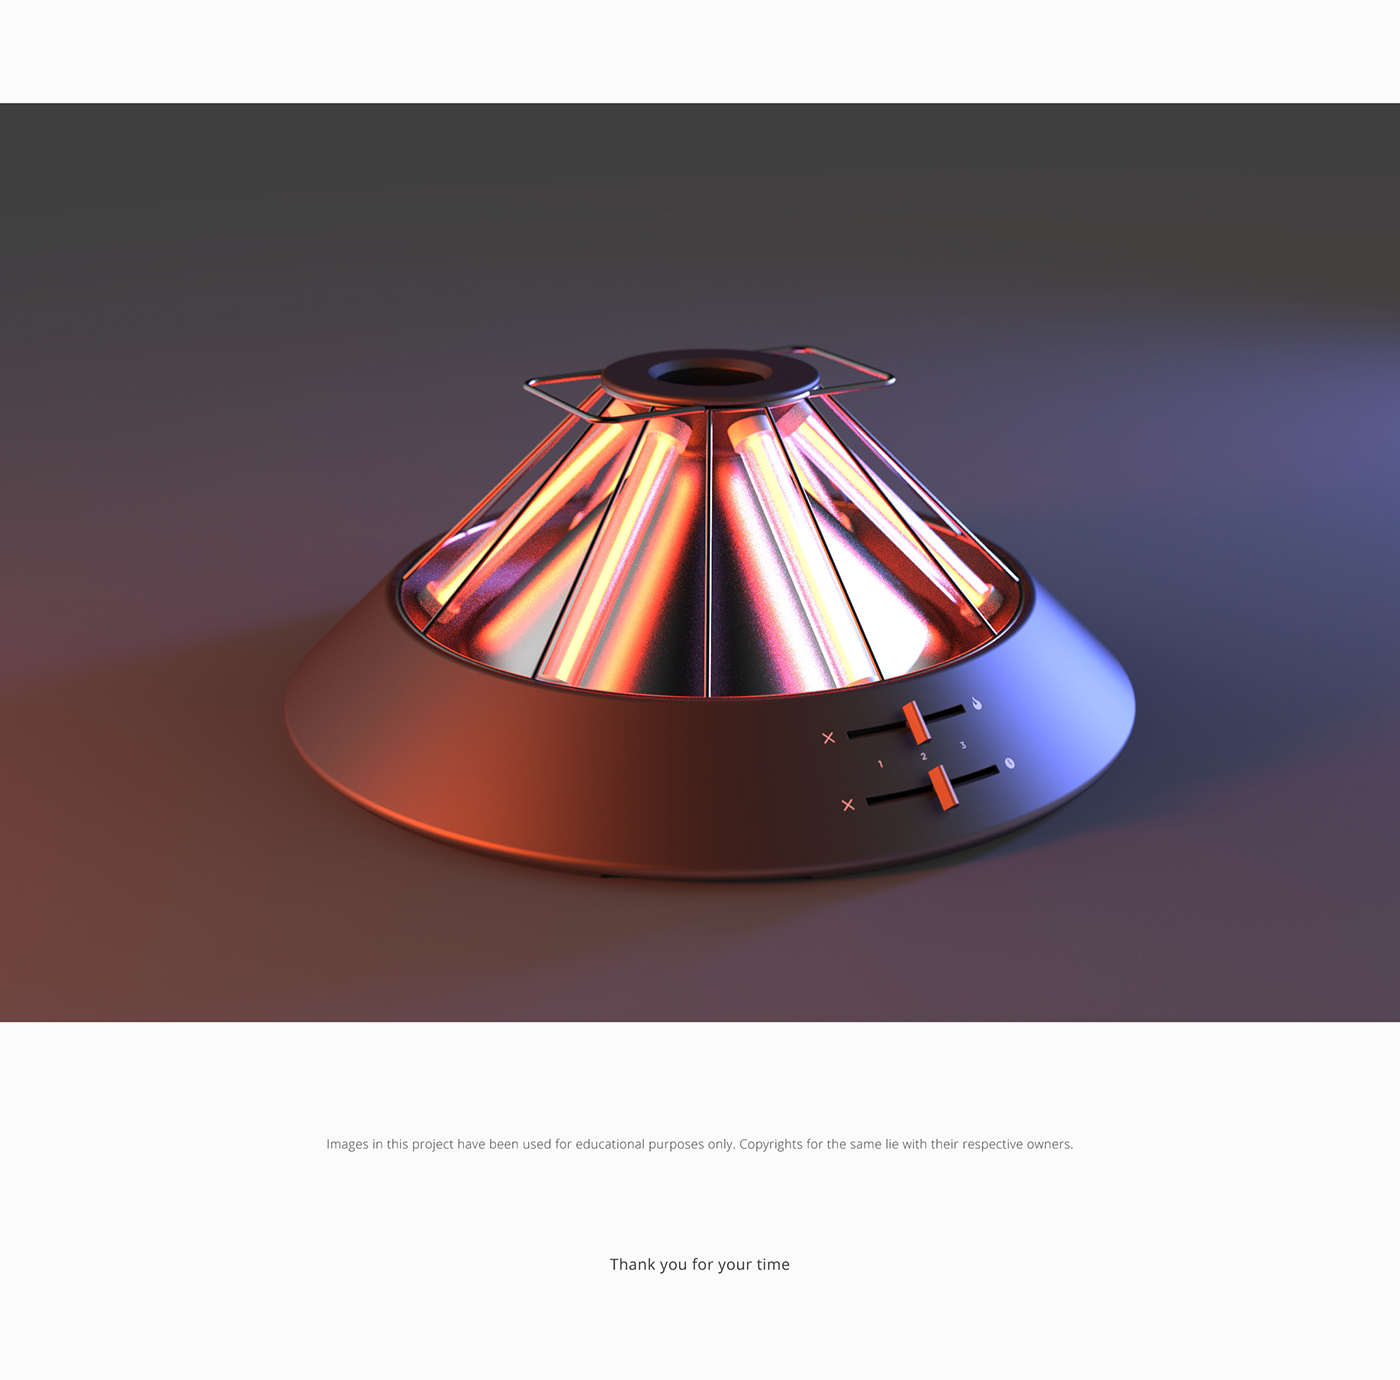 heater infrared emotion conversation storytelling   concept warm fire electric adobeawards